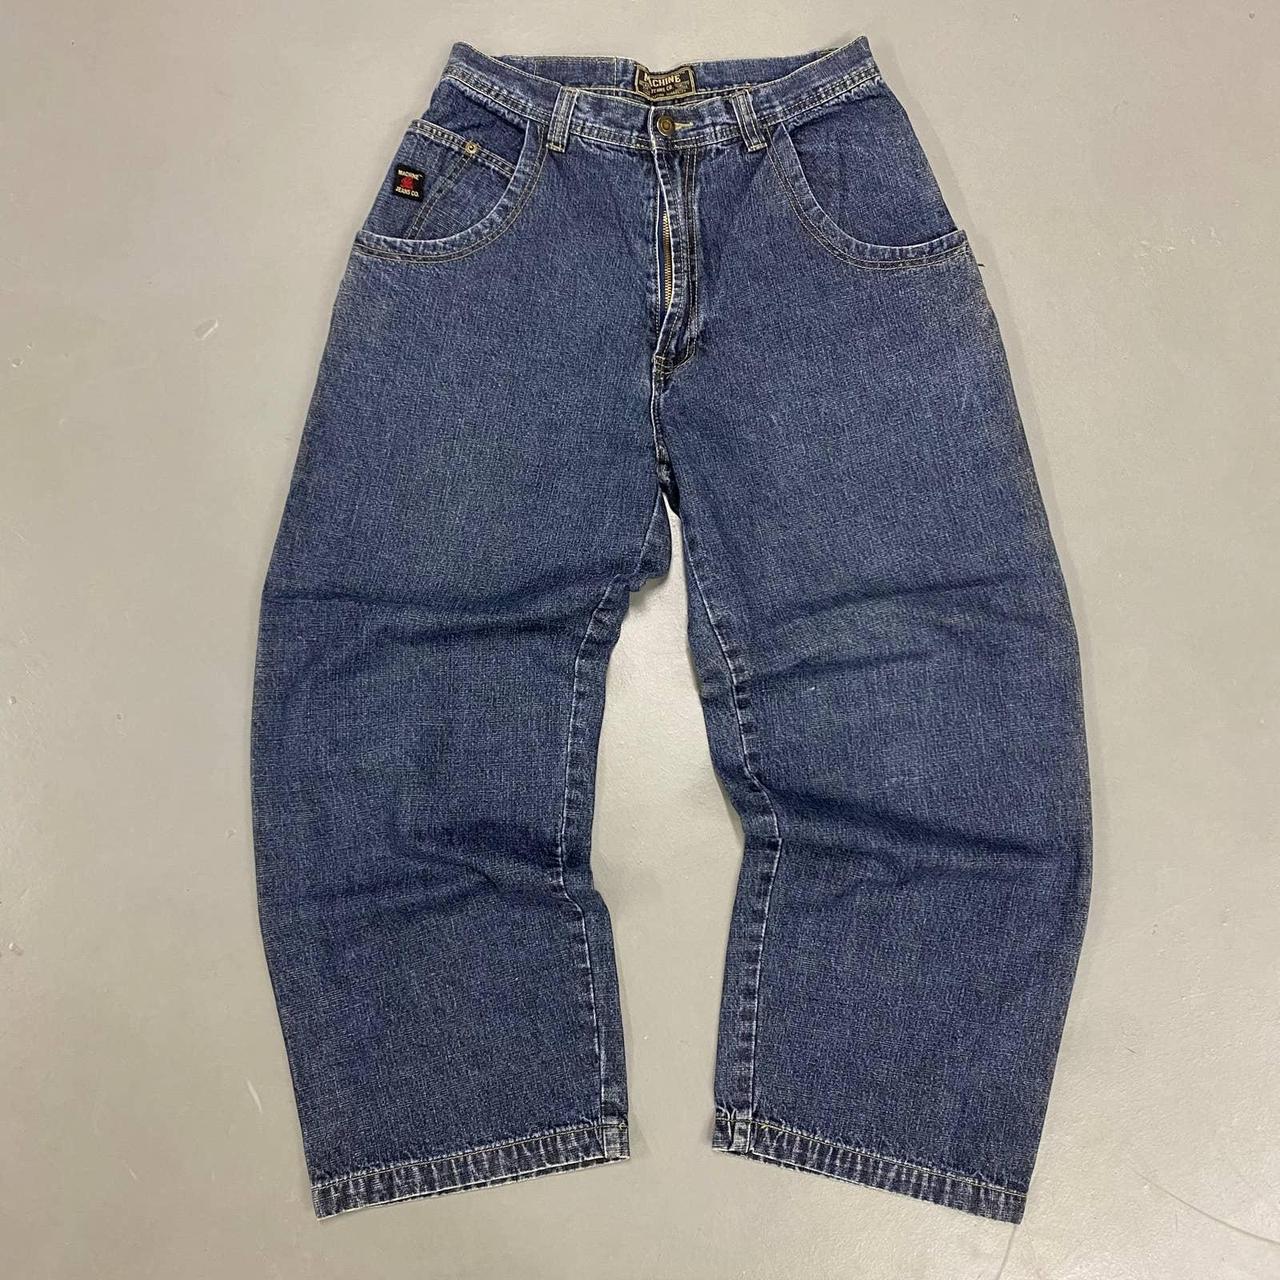 JNCO Style Y2K Pitbull Baggy Jeans Due to the... - Depop